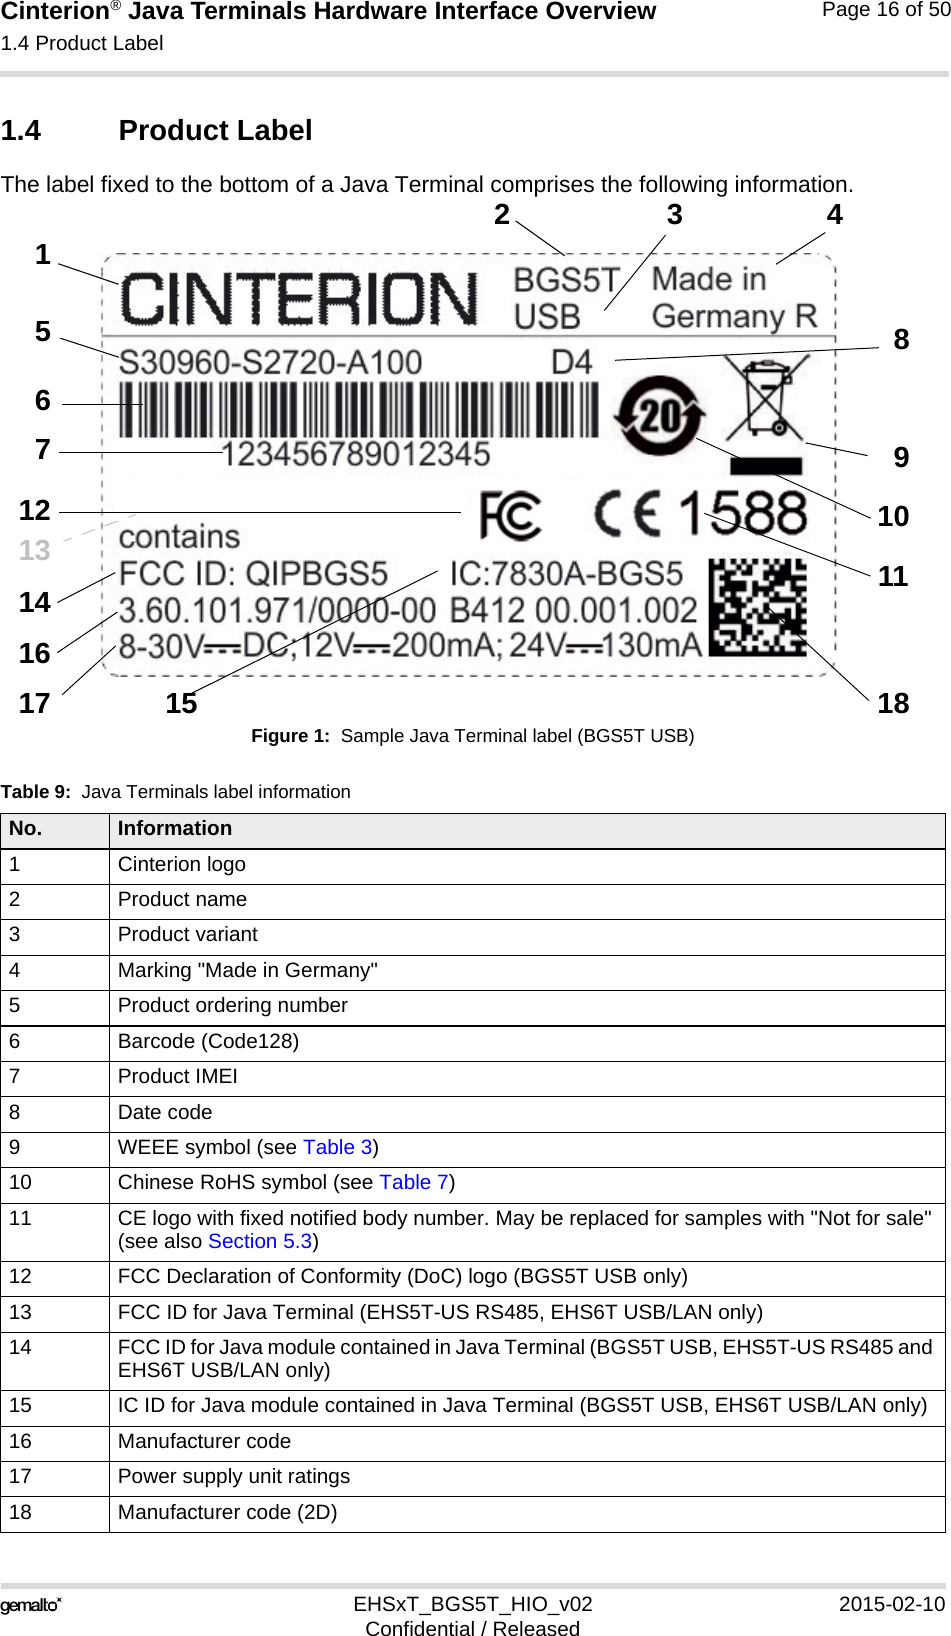 Cinterion® Java Terminals Hardware Interface Overview1.4 Product Label16EHSxT_BGS5T_HIO_v02 2015-02-10Confidential / ReleasedPage 16 of 501.4 Product LabelThe label fixed to the bottom of a Java Terminal comprises the following information.Figure 1:  Sample Java Terminal label (BGS5T USB)Table 9:  Java Terminals label informationNo. Information1 Cinterion logo2 Product name3 Product variant4 Marking &quot;Made in Germany&quot;5 Product ordering number6 Barcode (Code128)7 Product IMEI8 Date code9 WEEE symbol (see Table 3)10 Chinese RoHS symbol (see Table 7)11 CE logo with fixed notified body number. May be replaced for samples with &quot;Not for sale&quot; (see also Section 5.3)12 FCC Declaration of Conformity (DoC) logo (BGS5T USB only)13 FCC ID for Java Terminal (EHS5T-US RS485, EHS6T USB/LAN only)14 FCC ID for Java module contained in Java Terminal (BGS5T USB, EHS5T-US RS485 and EHS6T USB/LAN only)15 IC ID for Java module contained in Java Terminal (BGS5T USB, EHS6T USB/LAN only)16 Manufacturer code17 Power supply unit ratings18 Manufacturer code (2D)1234567891012151617 18111314